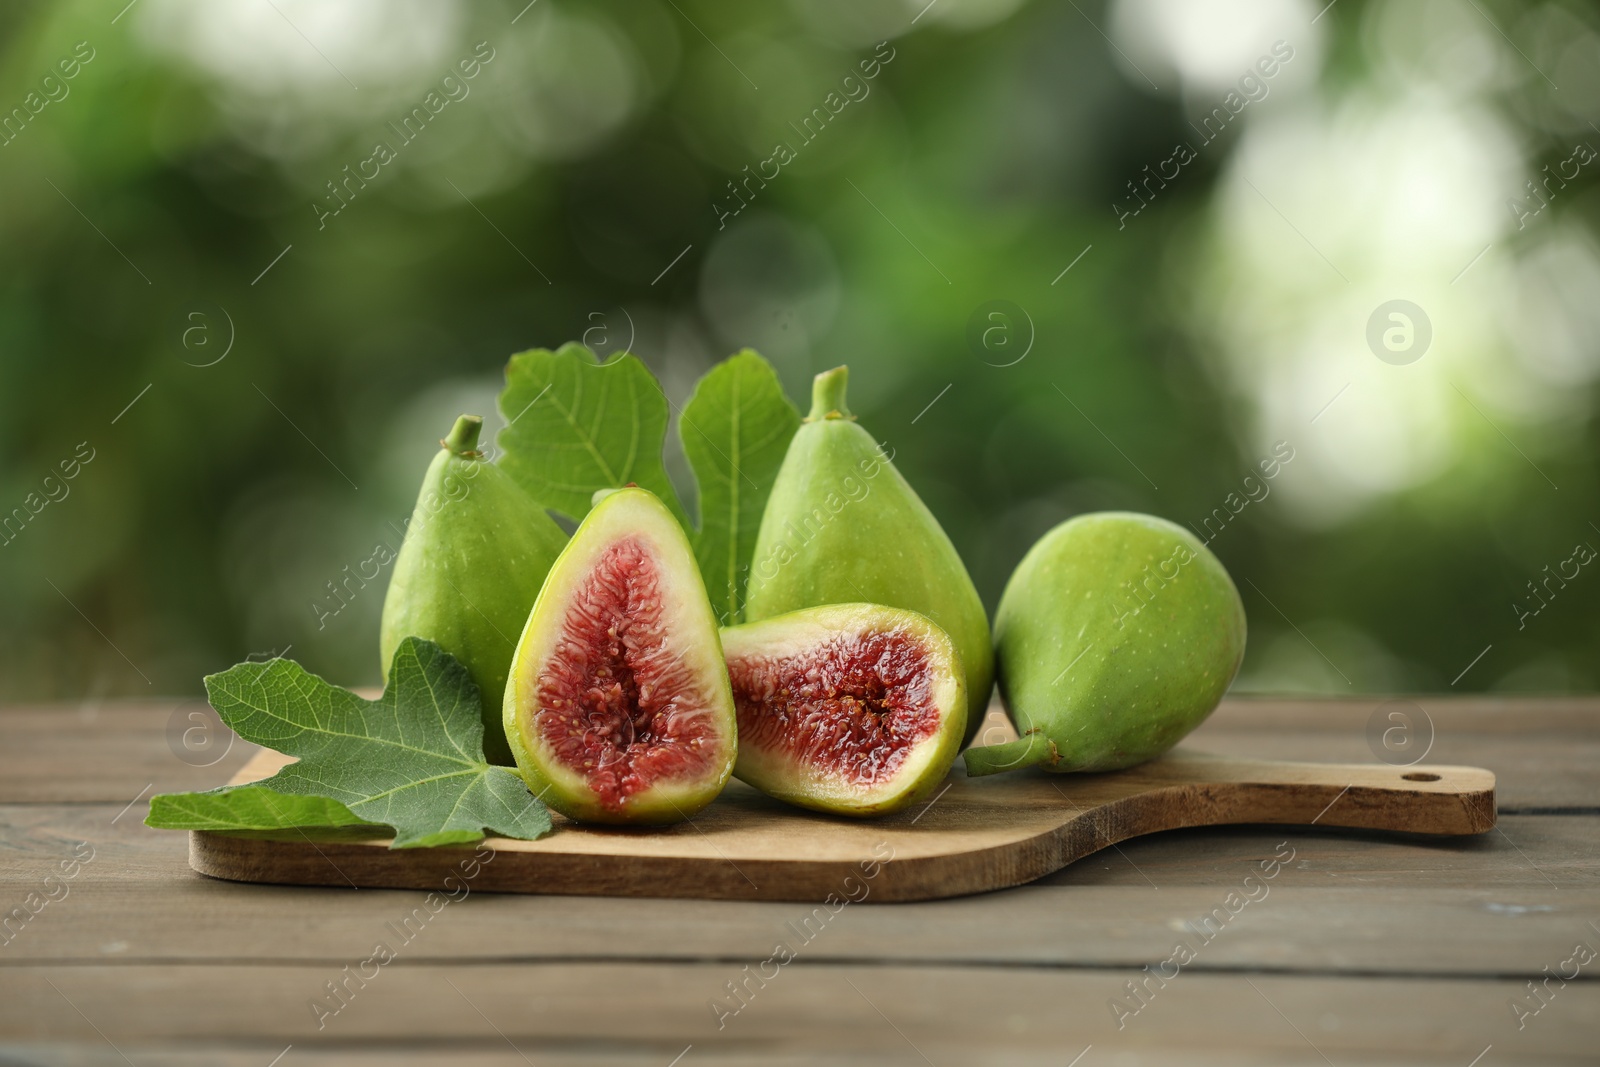 Photo of Cut and whole green figs on wooden table against blurred background